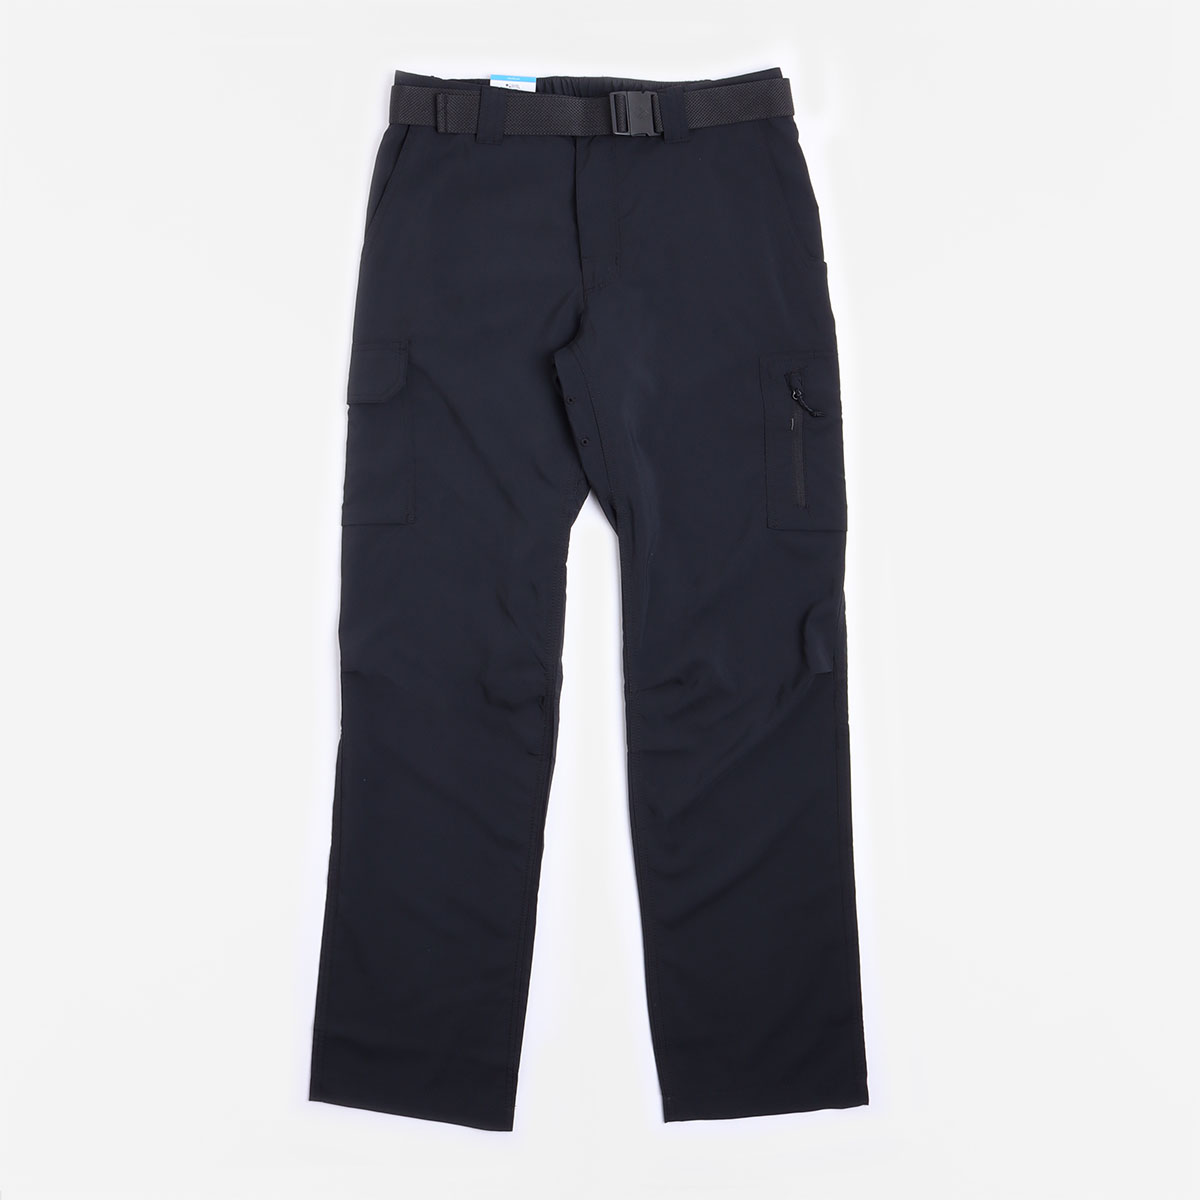 Columbia OUTDOOR ELEMENTS STRETCH PANTS | sportisimo.com